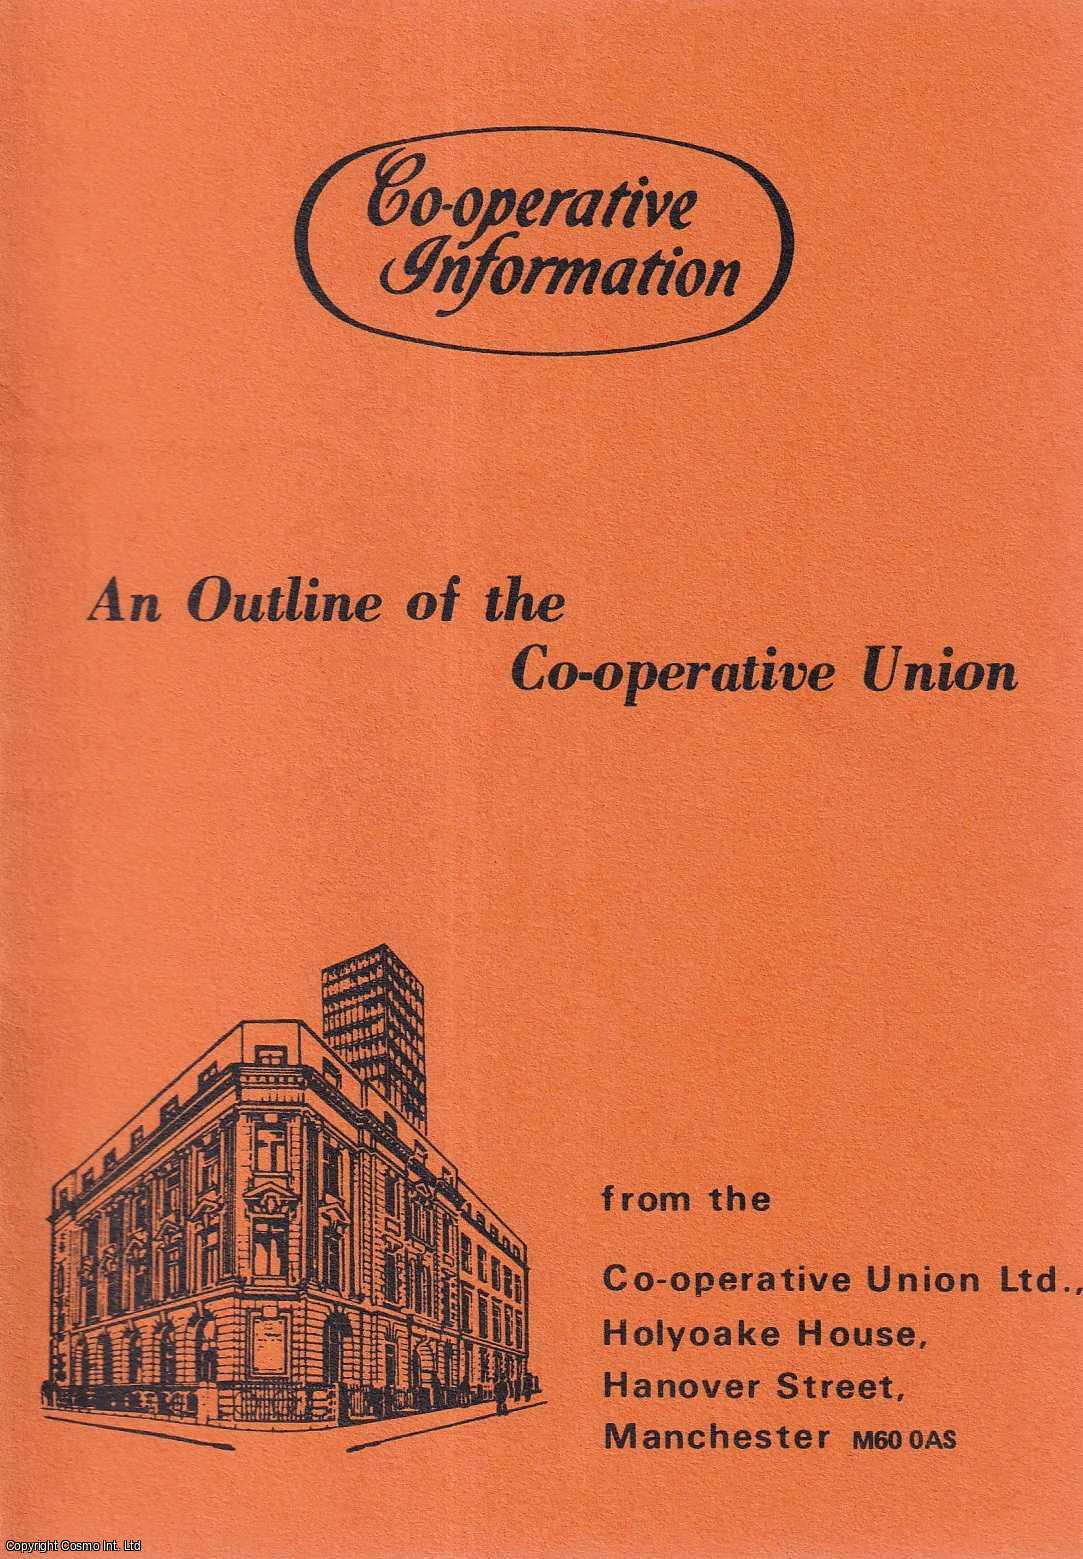 Co-operative Union - An Outline of the Co-operative Union.